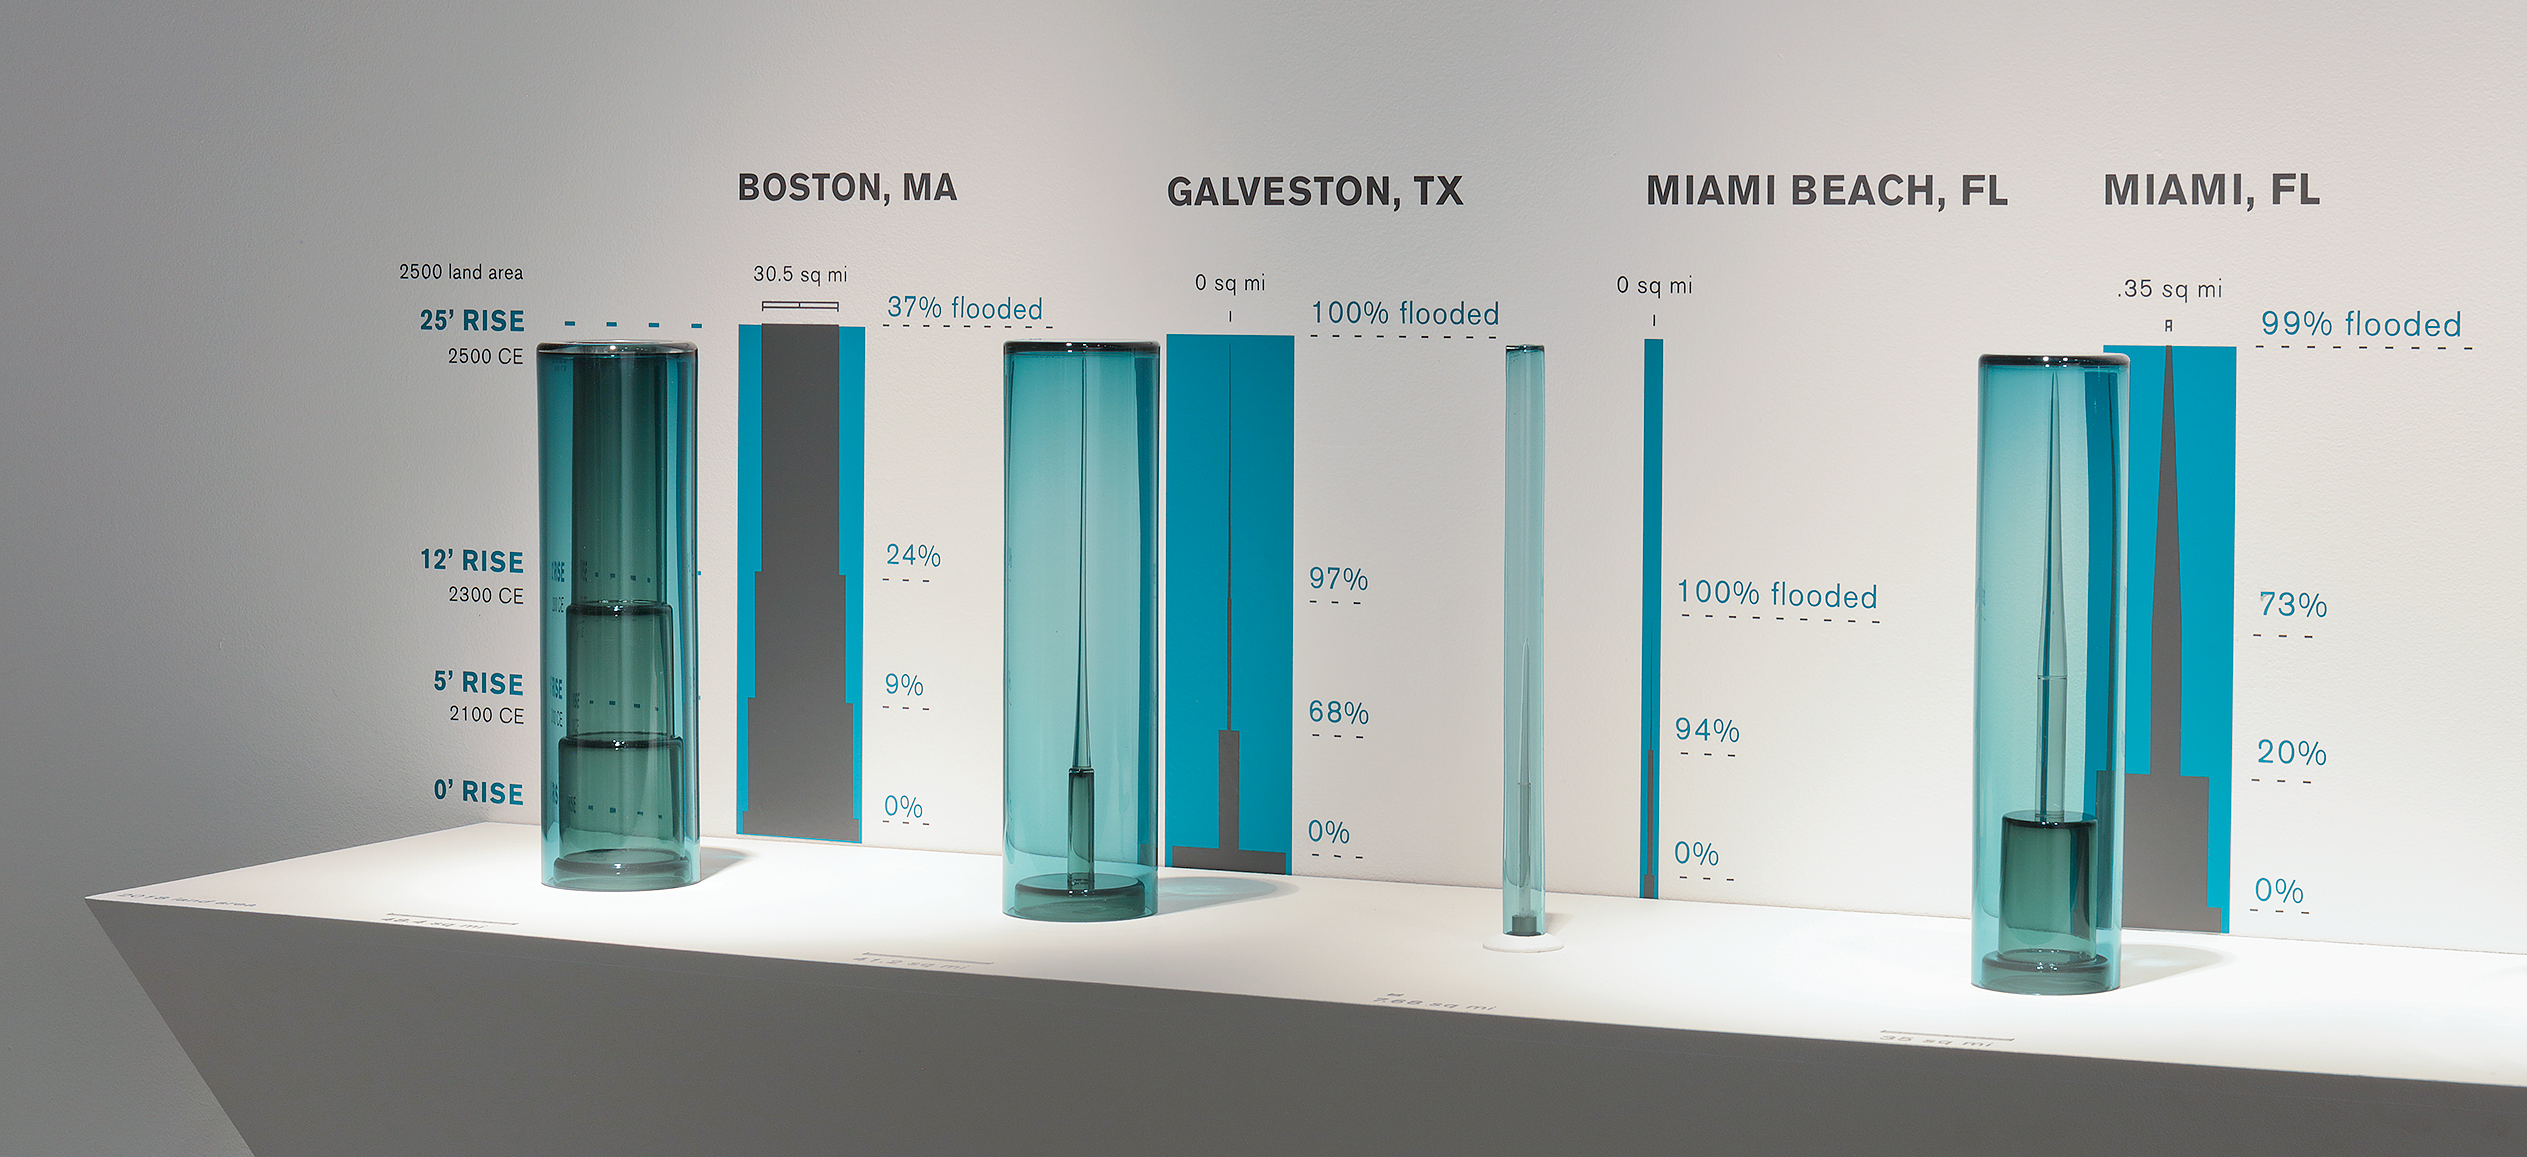 Installation detail of Viviano’s blown glass Cities Underwater, 2018, showing predicted land loss due to sea level rise in Boston; Galveston, Texas; and Miami Beach and Miami, Florida. 